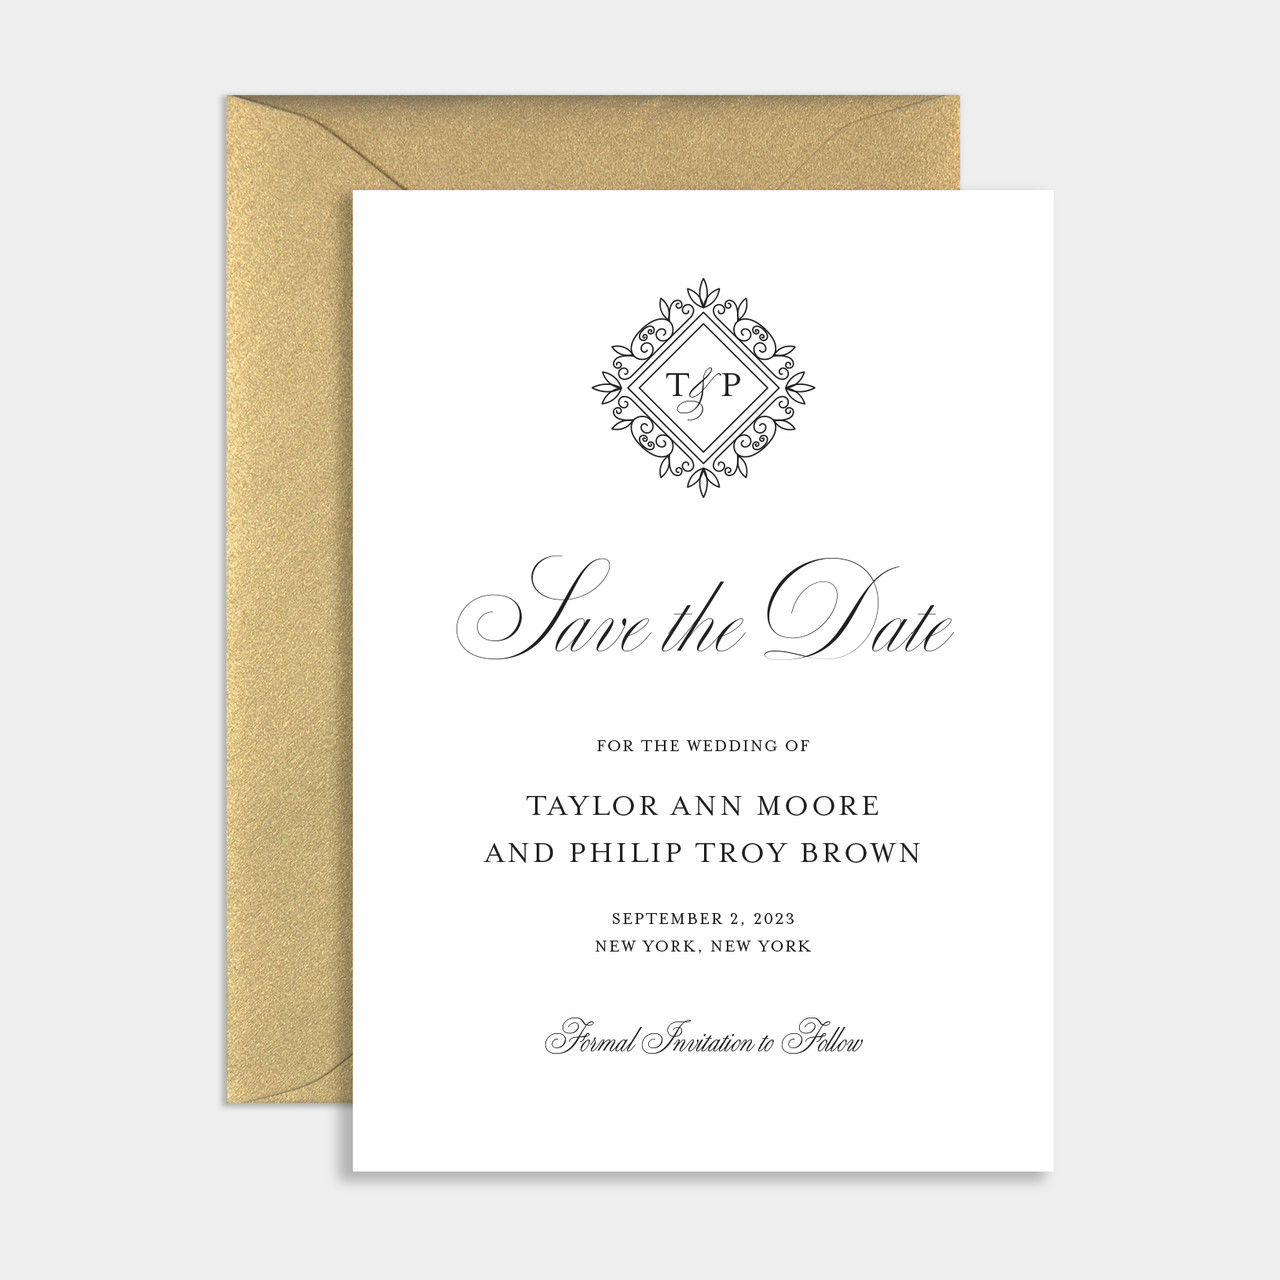 Save the Date Cards for Weddings Elegant, Save the Date Wedding, Save the  Date Wedding Invites, Save the Date Personalized, Your choice of Quantity